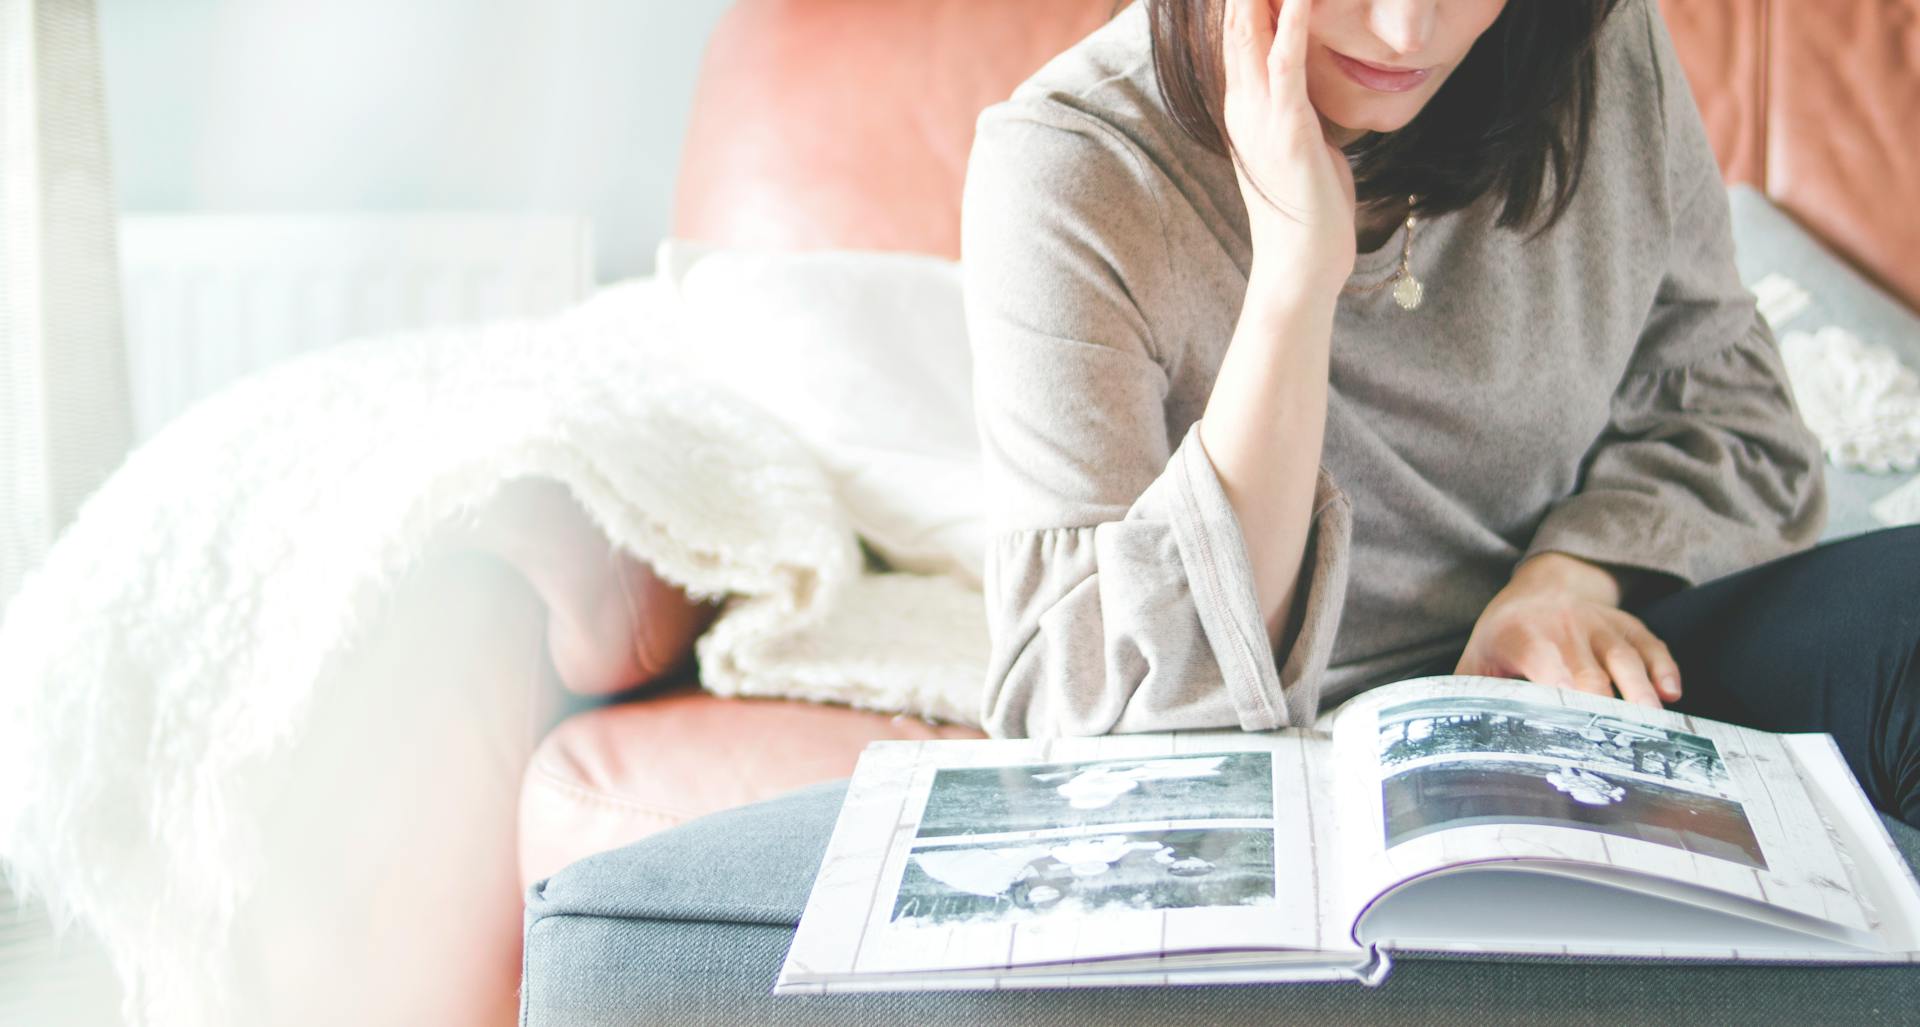 A woman looking at a photo album | Source: Pexels